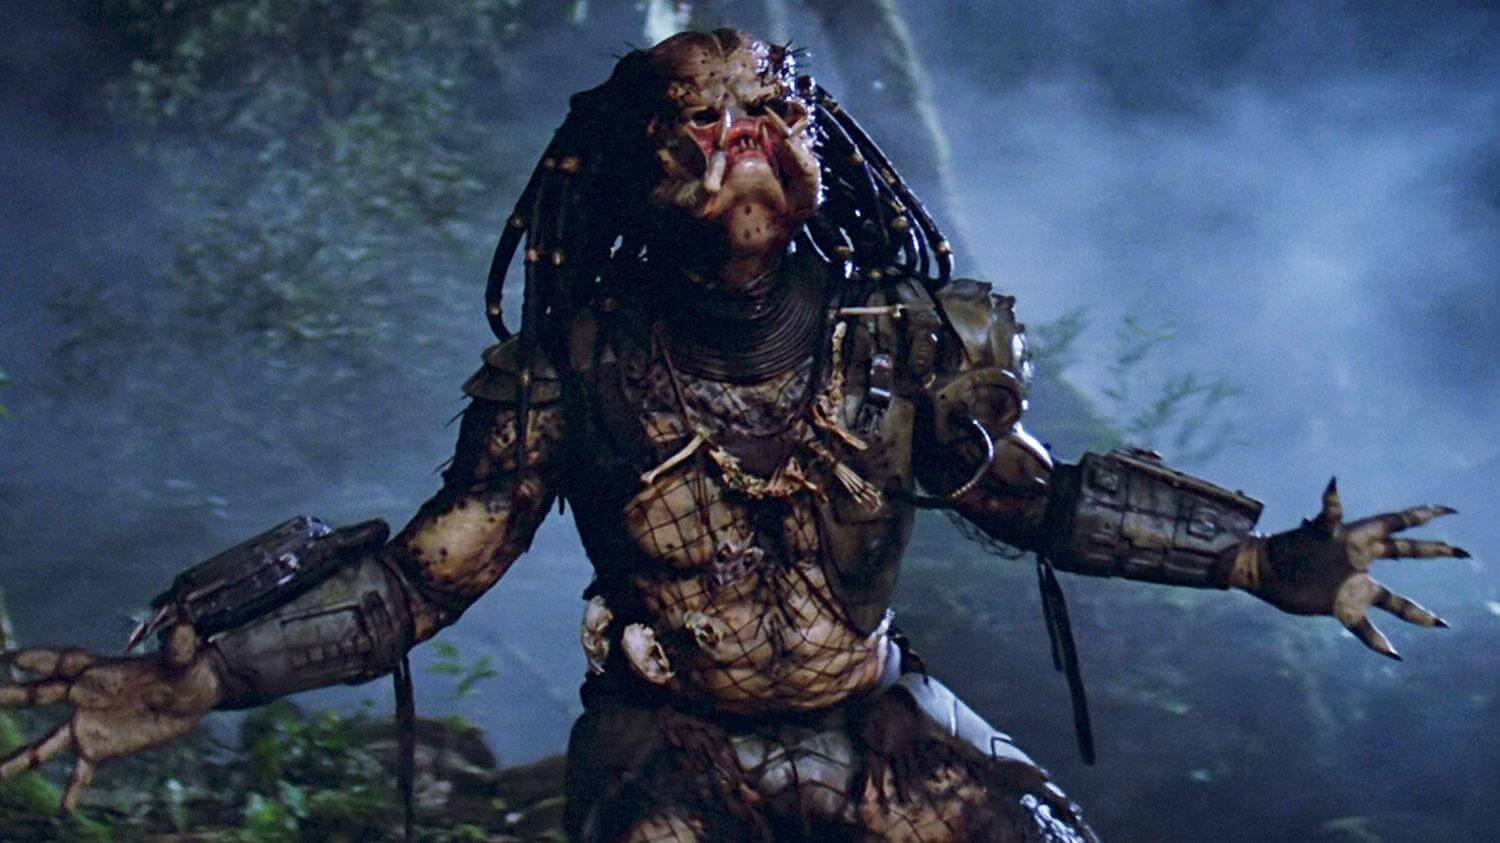 The Next ‘Predator’ Film Will Possibly Be A Hulu Exclusive